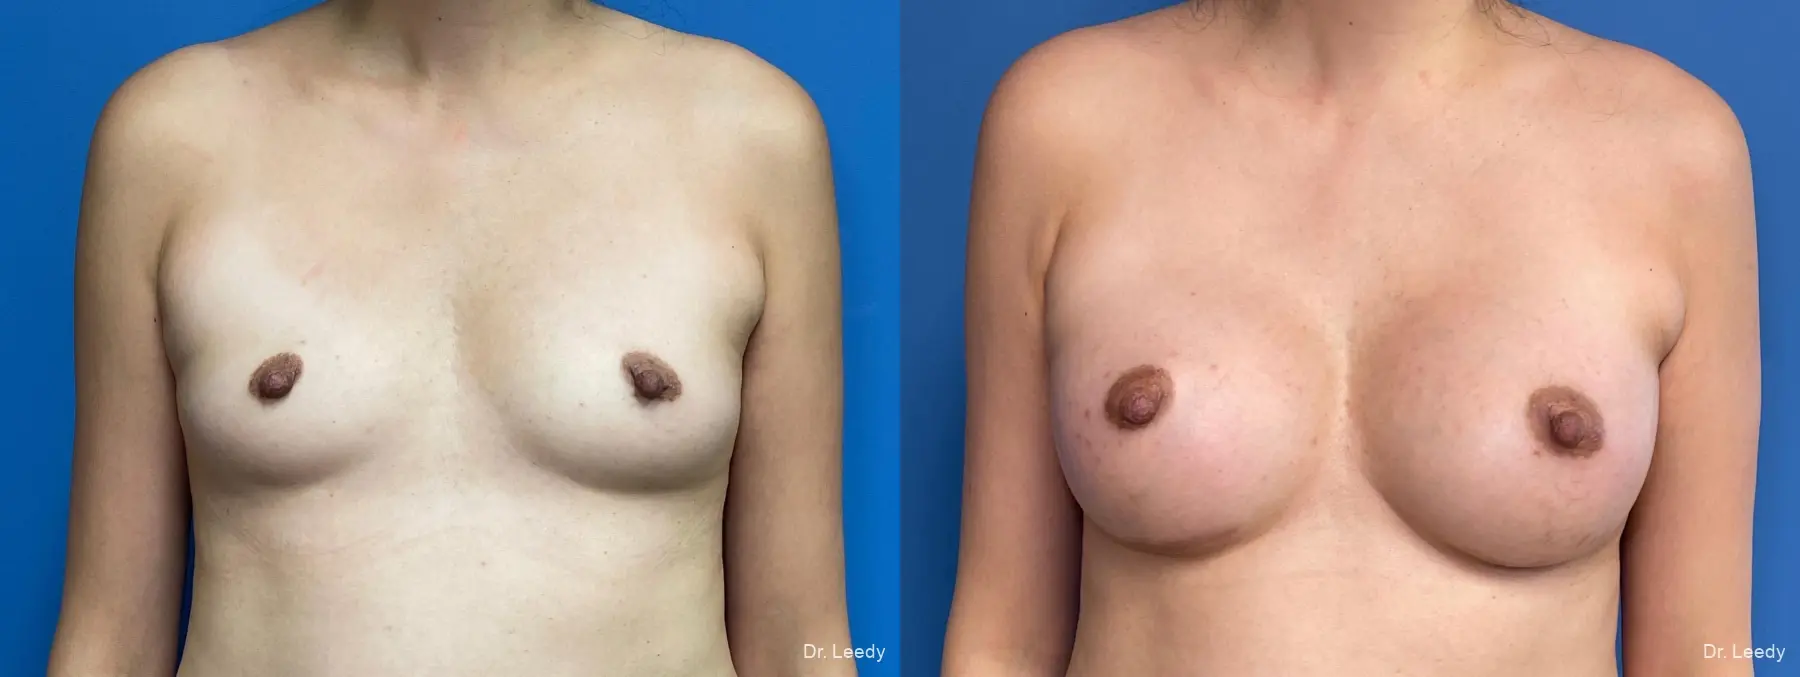 Breast Augmentation: Patient 1 - Before and After 1